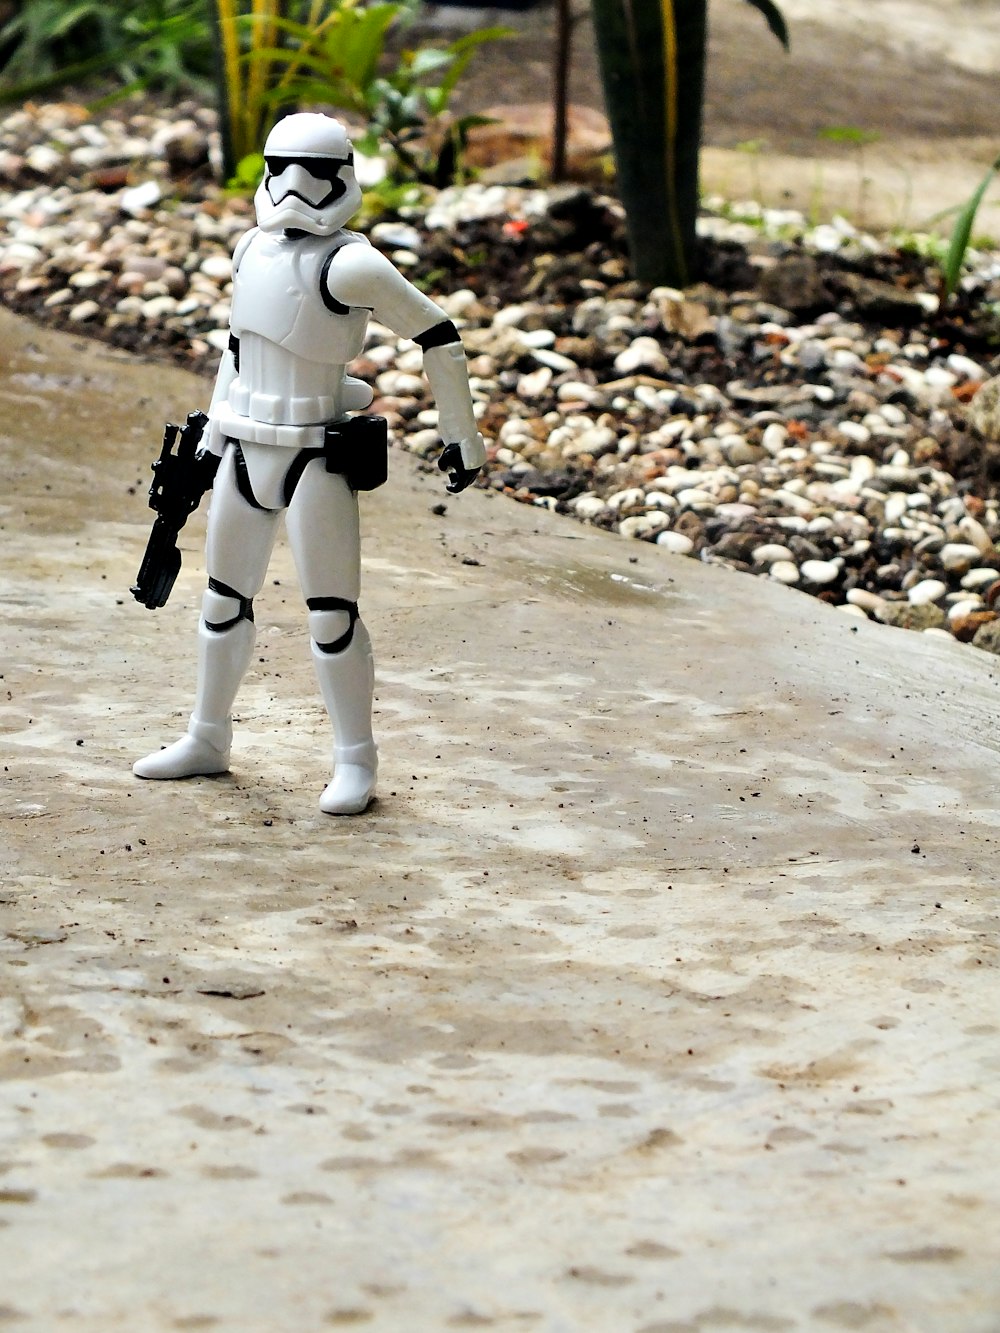 a toy stormtrooper is standing on a sidewalk